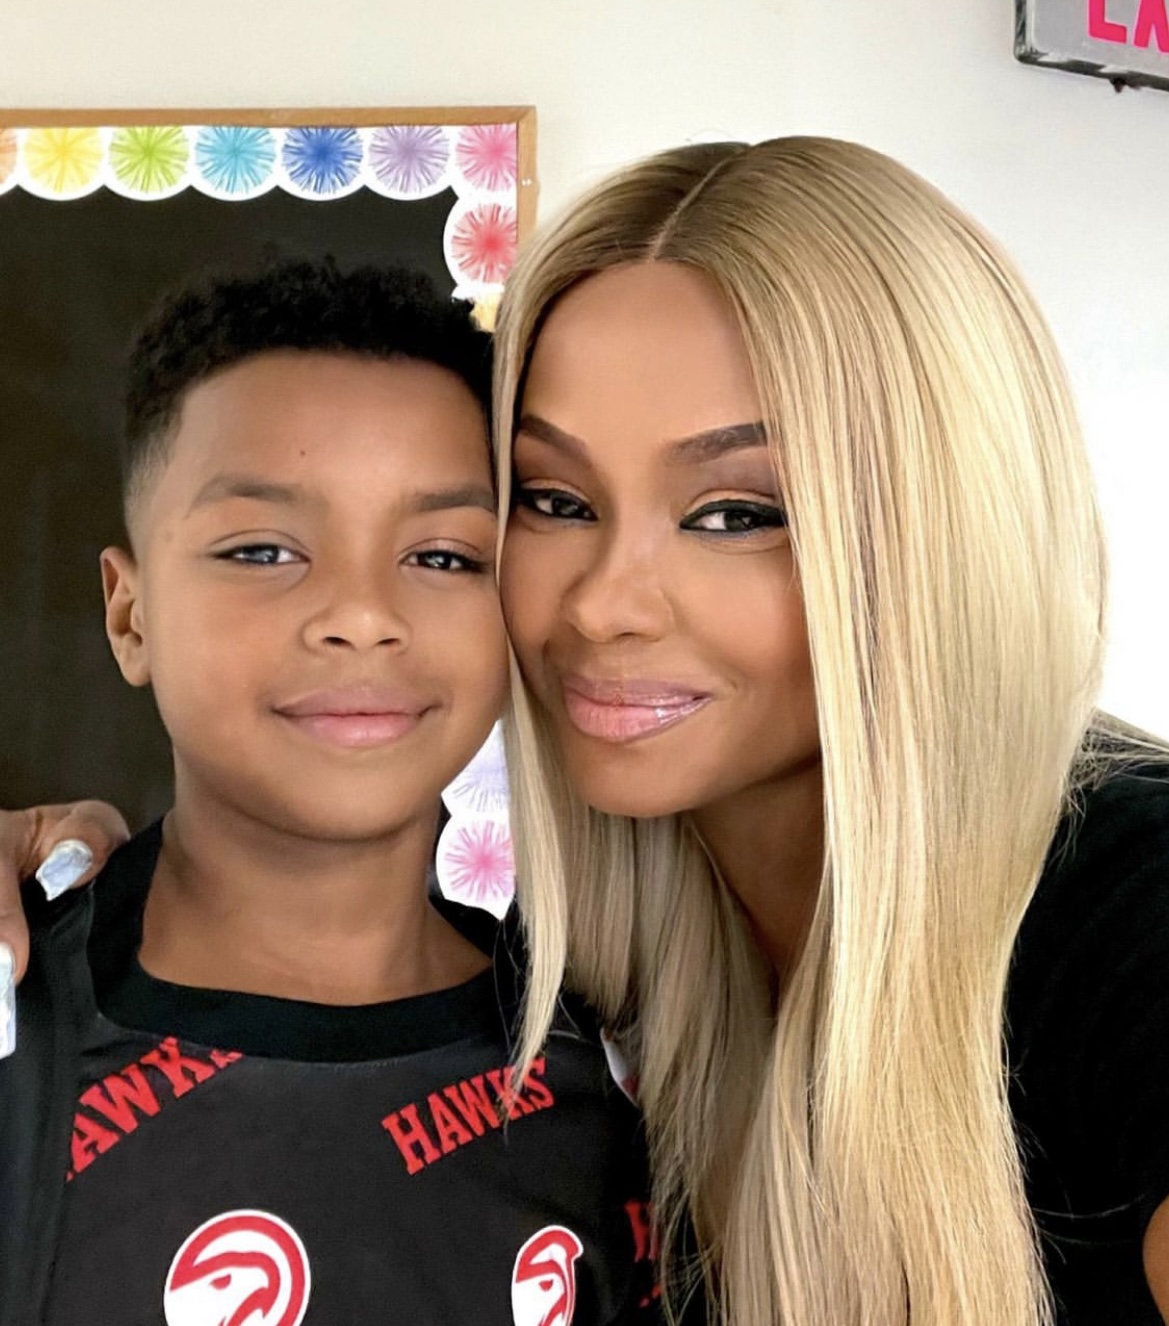 Phaedra Parks and Apollo Nida Come Together for Their Son's First Day of Fourth Grade, Fans Can't Help But Notice the Child's Blank Facial Expression